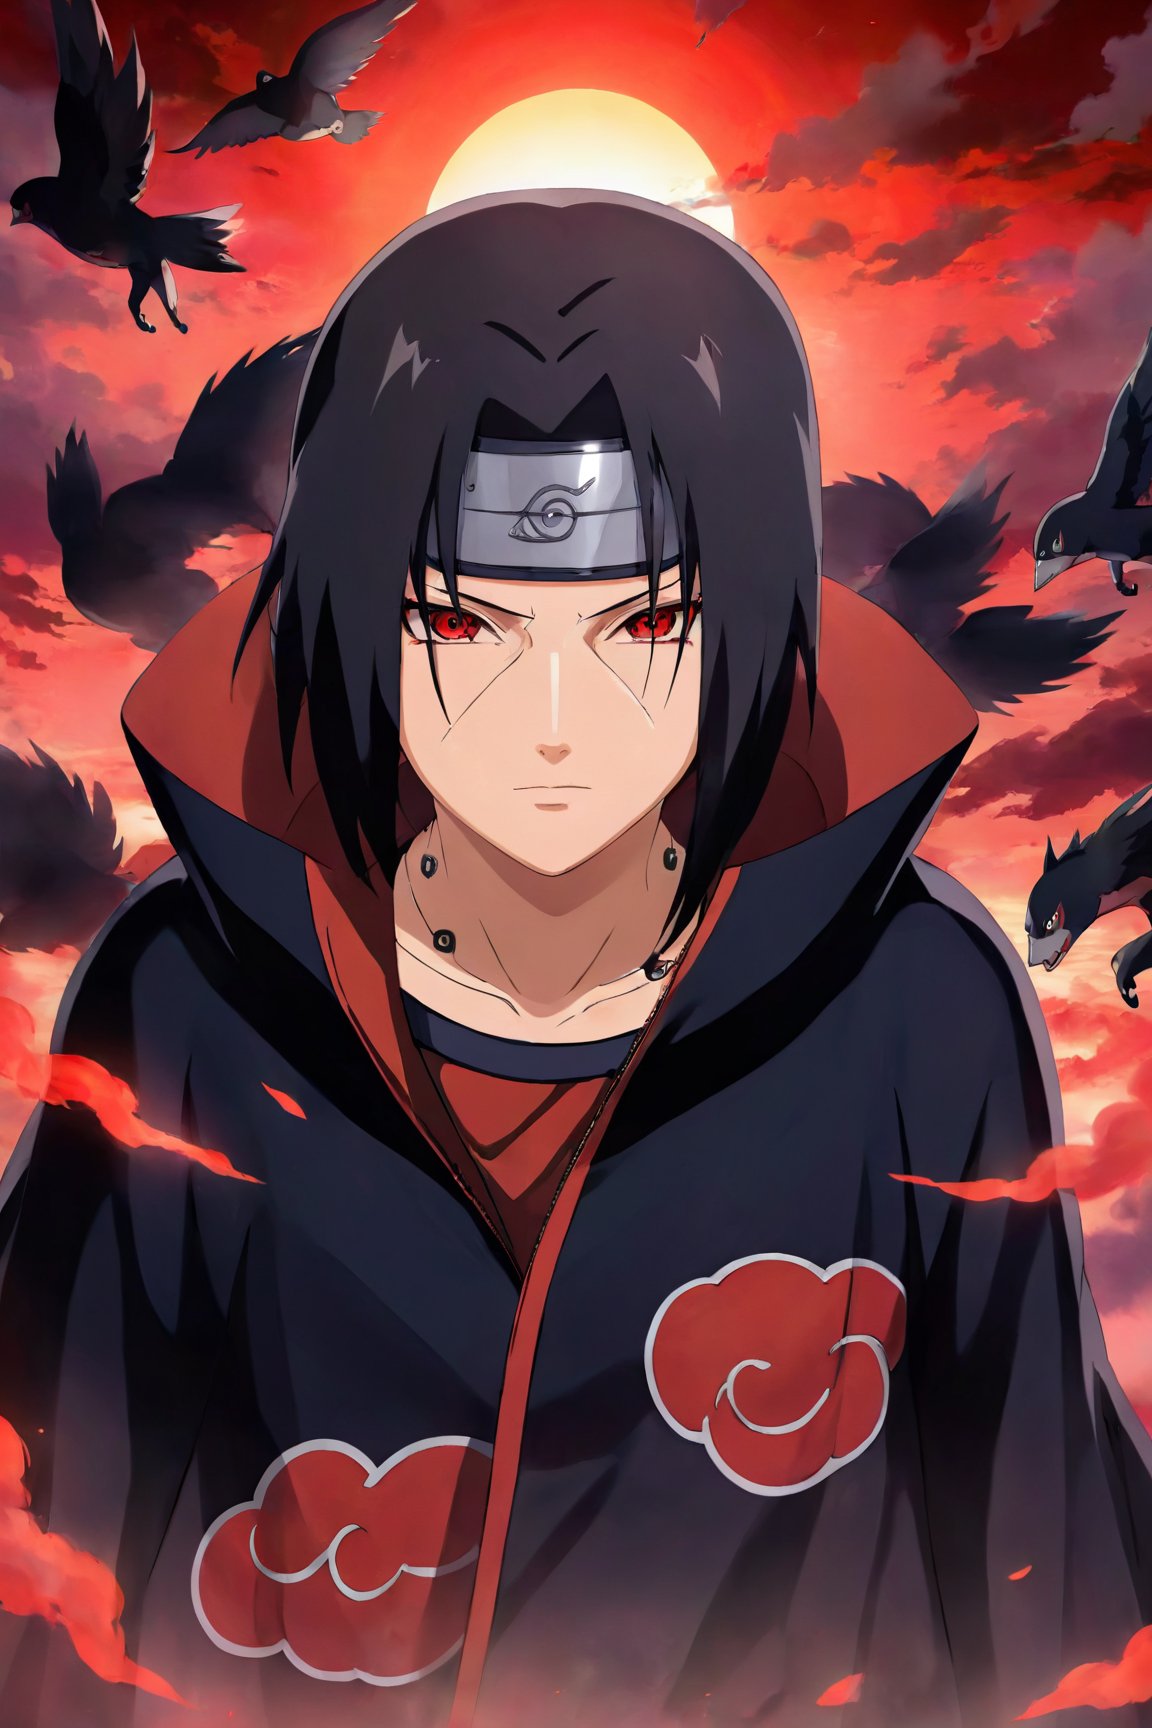 Itachi Uchiha, a powerful figure from the anime world, stands tall in a dynamic pose. His piercing, red Sharingan eyes gleam with intense detail, capturing the essence of his character. The Uchiha clan's trademark black hair, styled with meticulous precision, frames Itachi's face. His sharp, defined facial features - from his strong jawline to his high cheekbones - add depth and realism to his likeness. Dressed in his iconic black Akatsuki cloak, decorated with red clouds, Itachi exudes an aura of mystery and intrigue